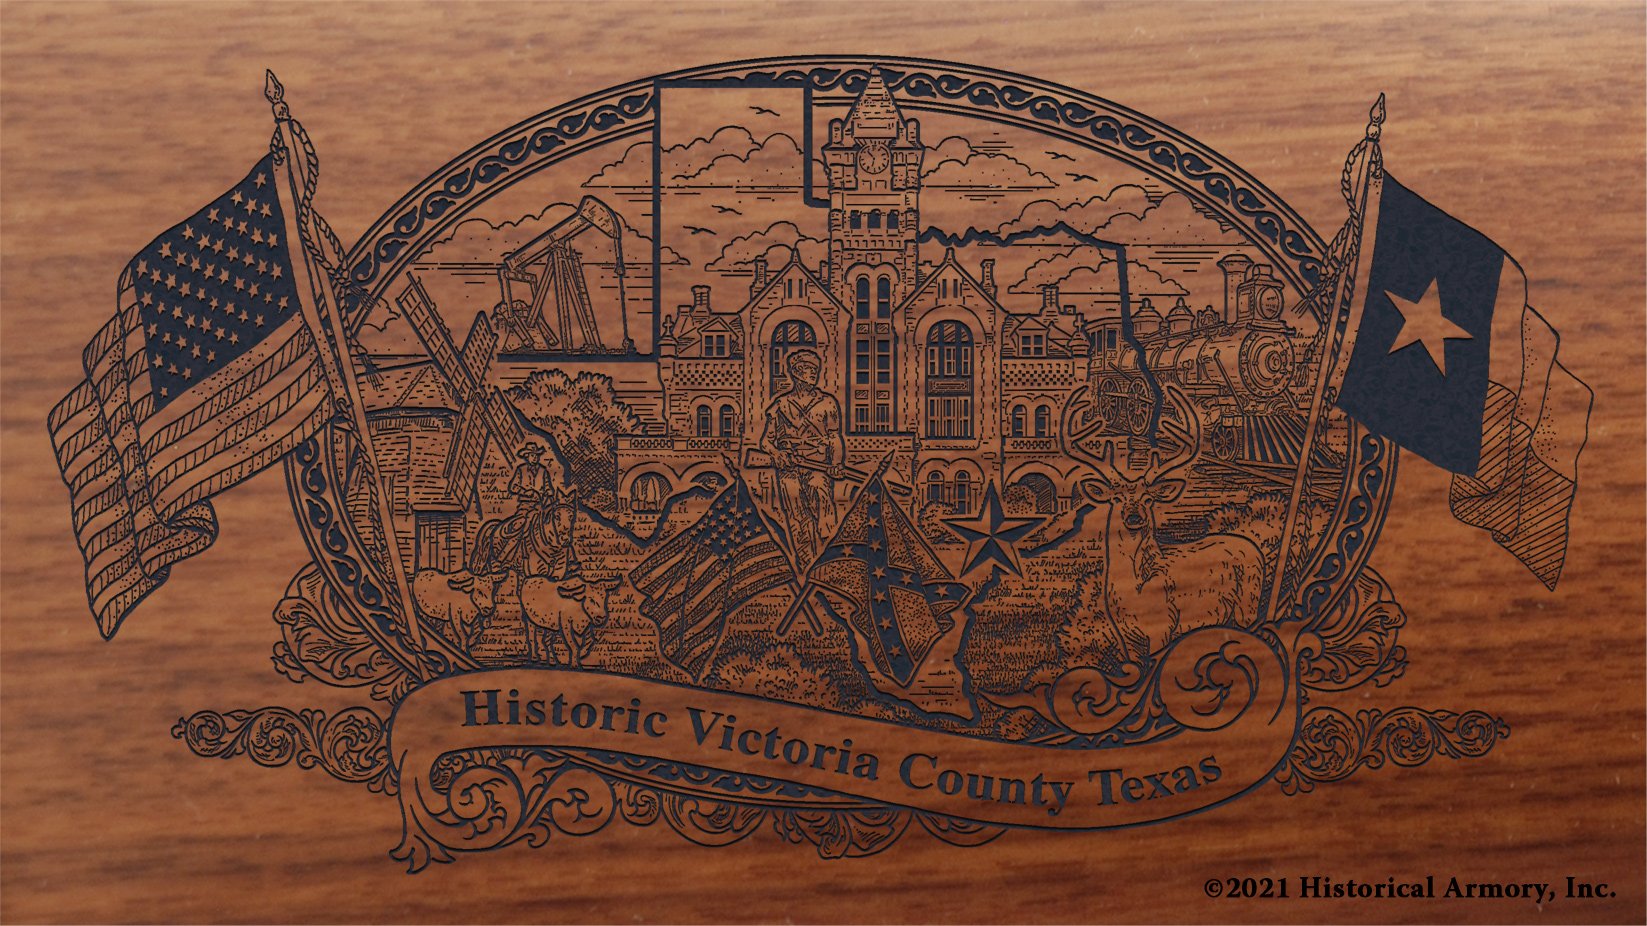 Engraved artwork | History of Victoria County Texas | Historical Armory